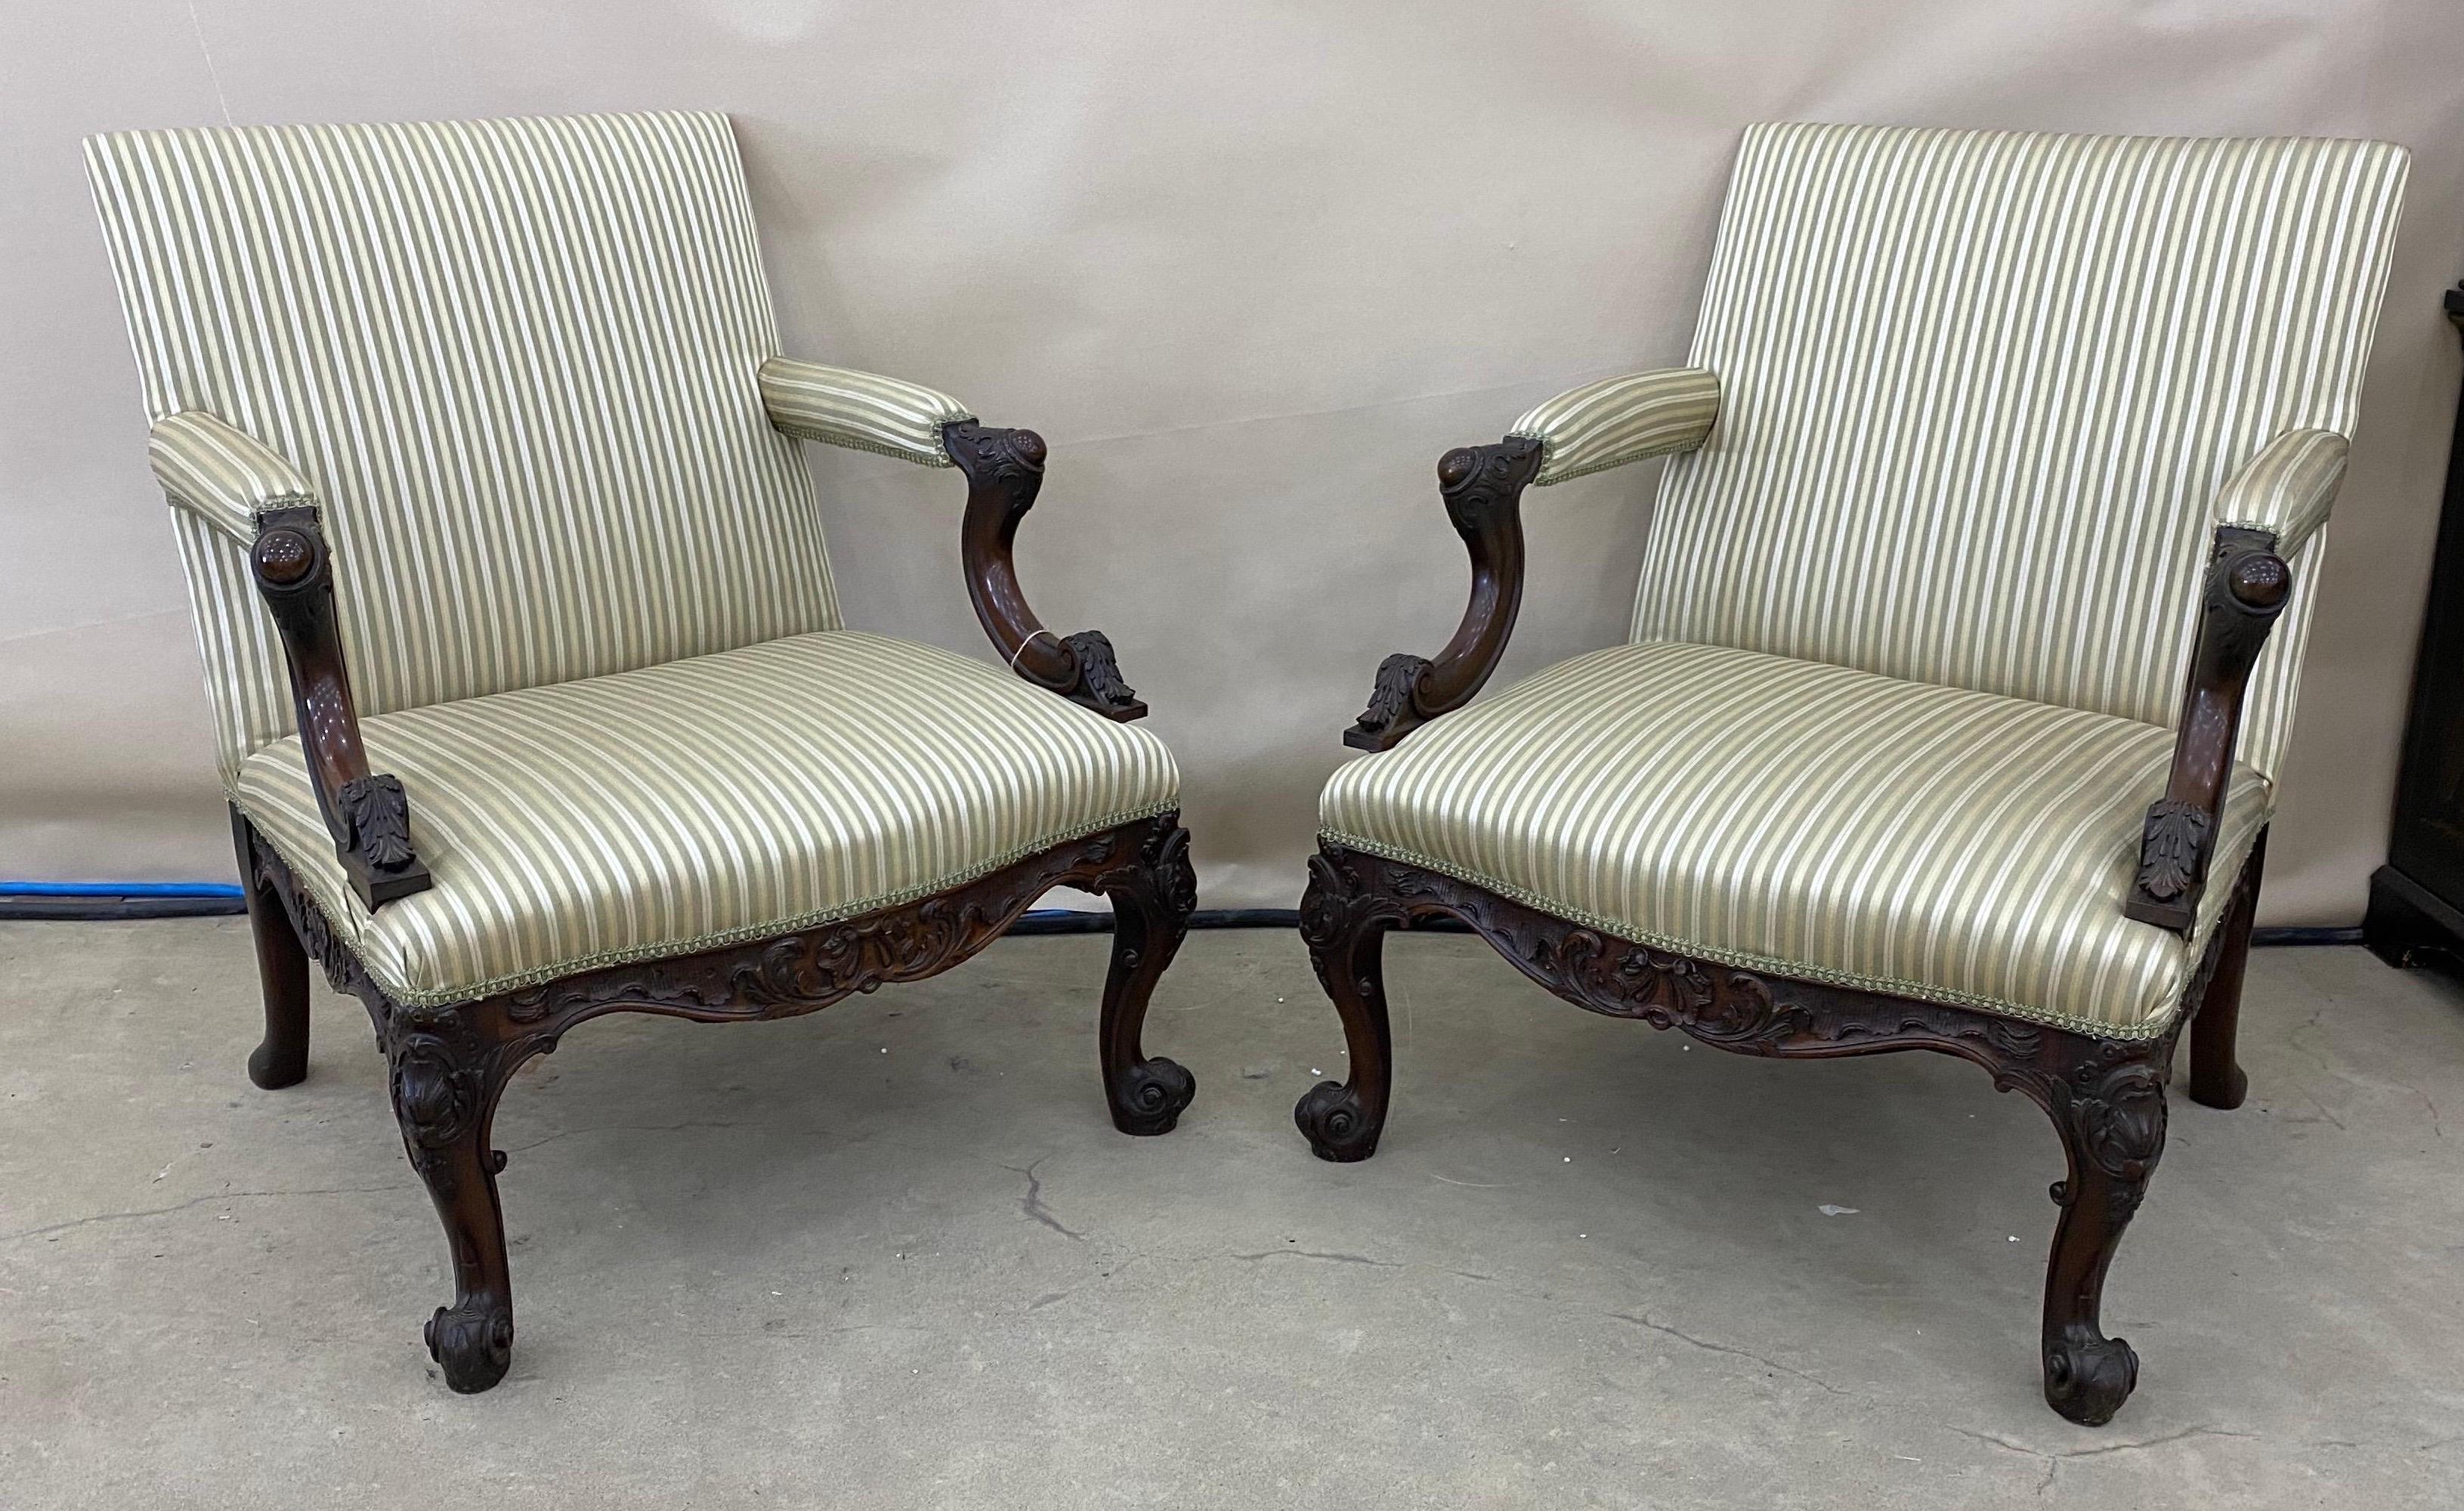 Fine pair of early 19th century Georgian mahogany Gainsborough chairs. Recently reupholstered.